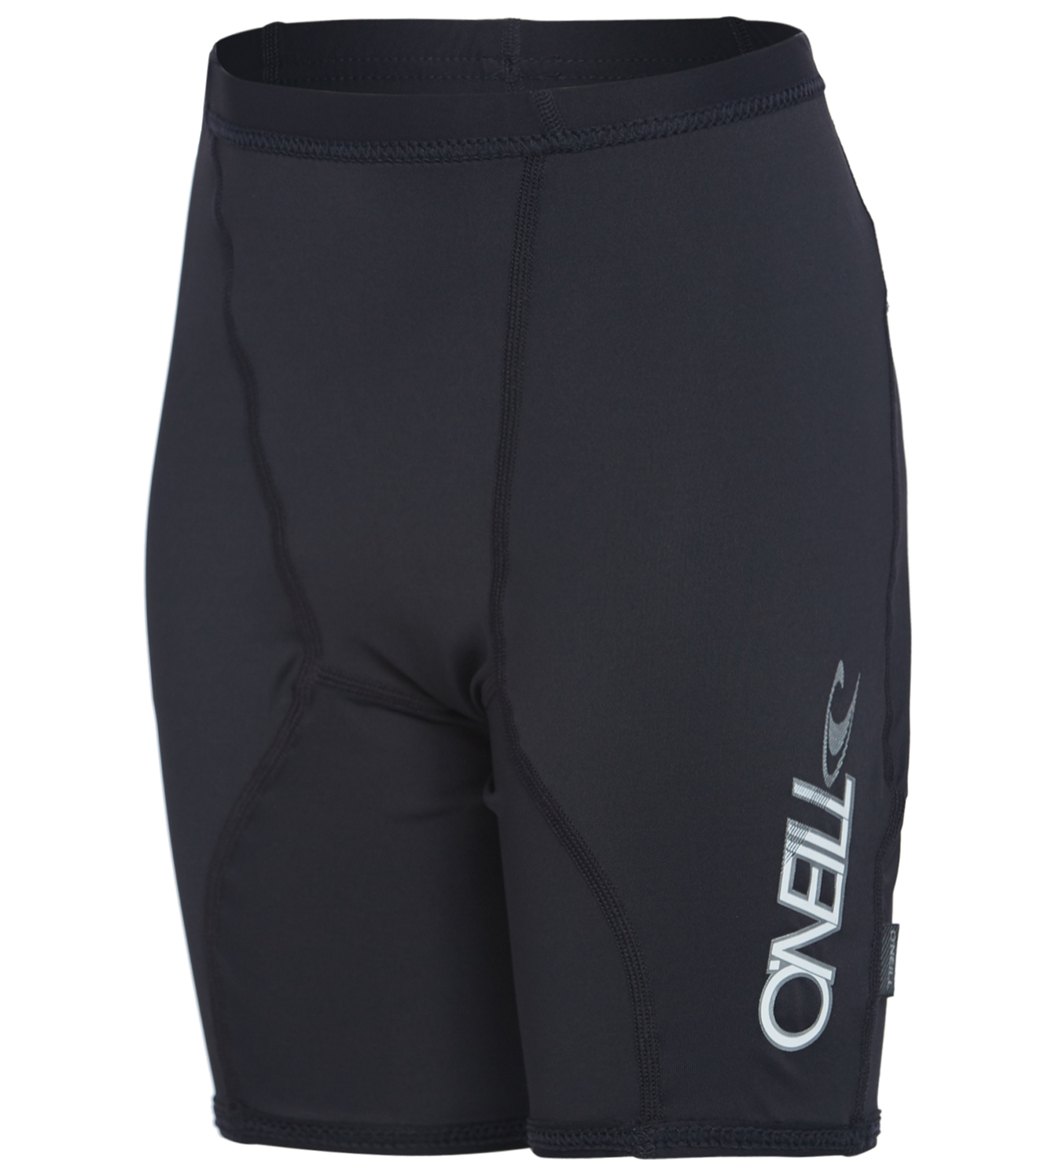 O'neill Boys' All Day Undershorts - Black 12 - Swimoutlet.com